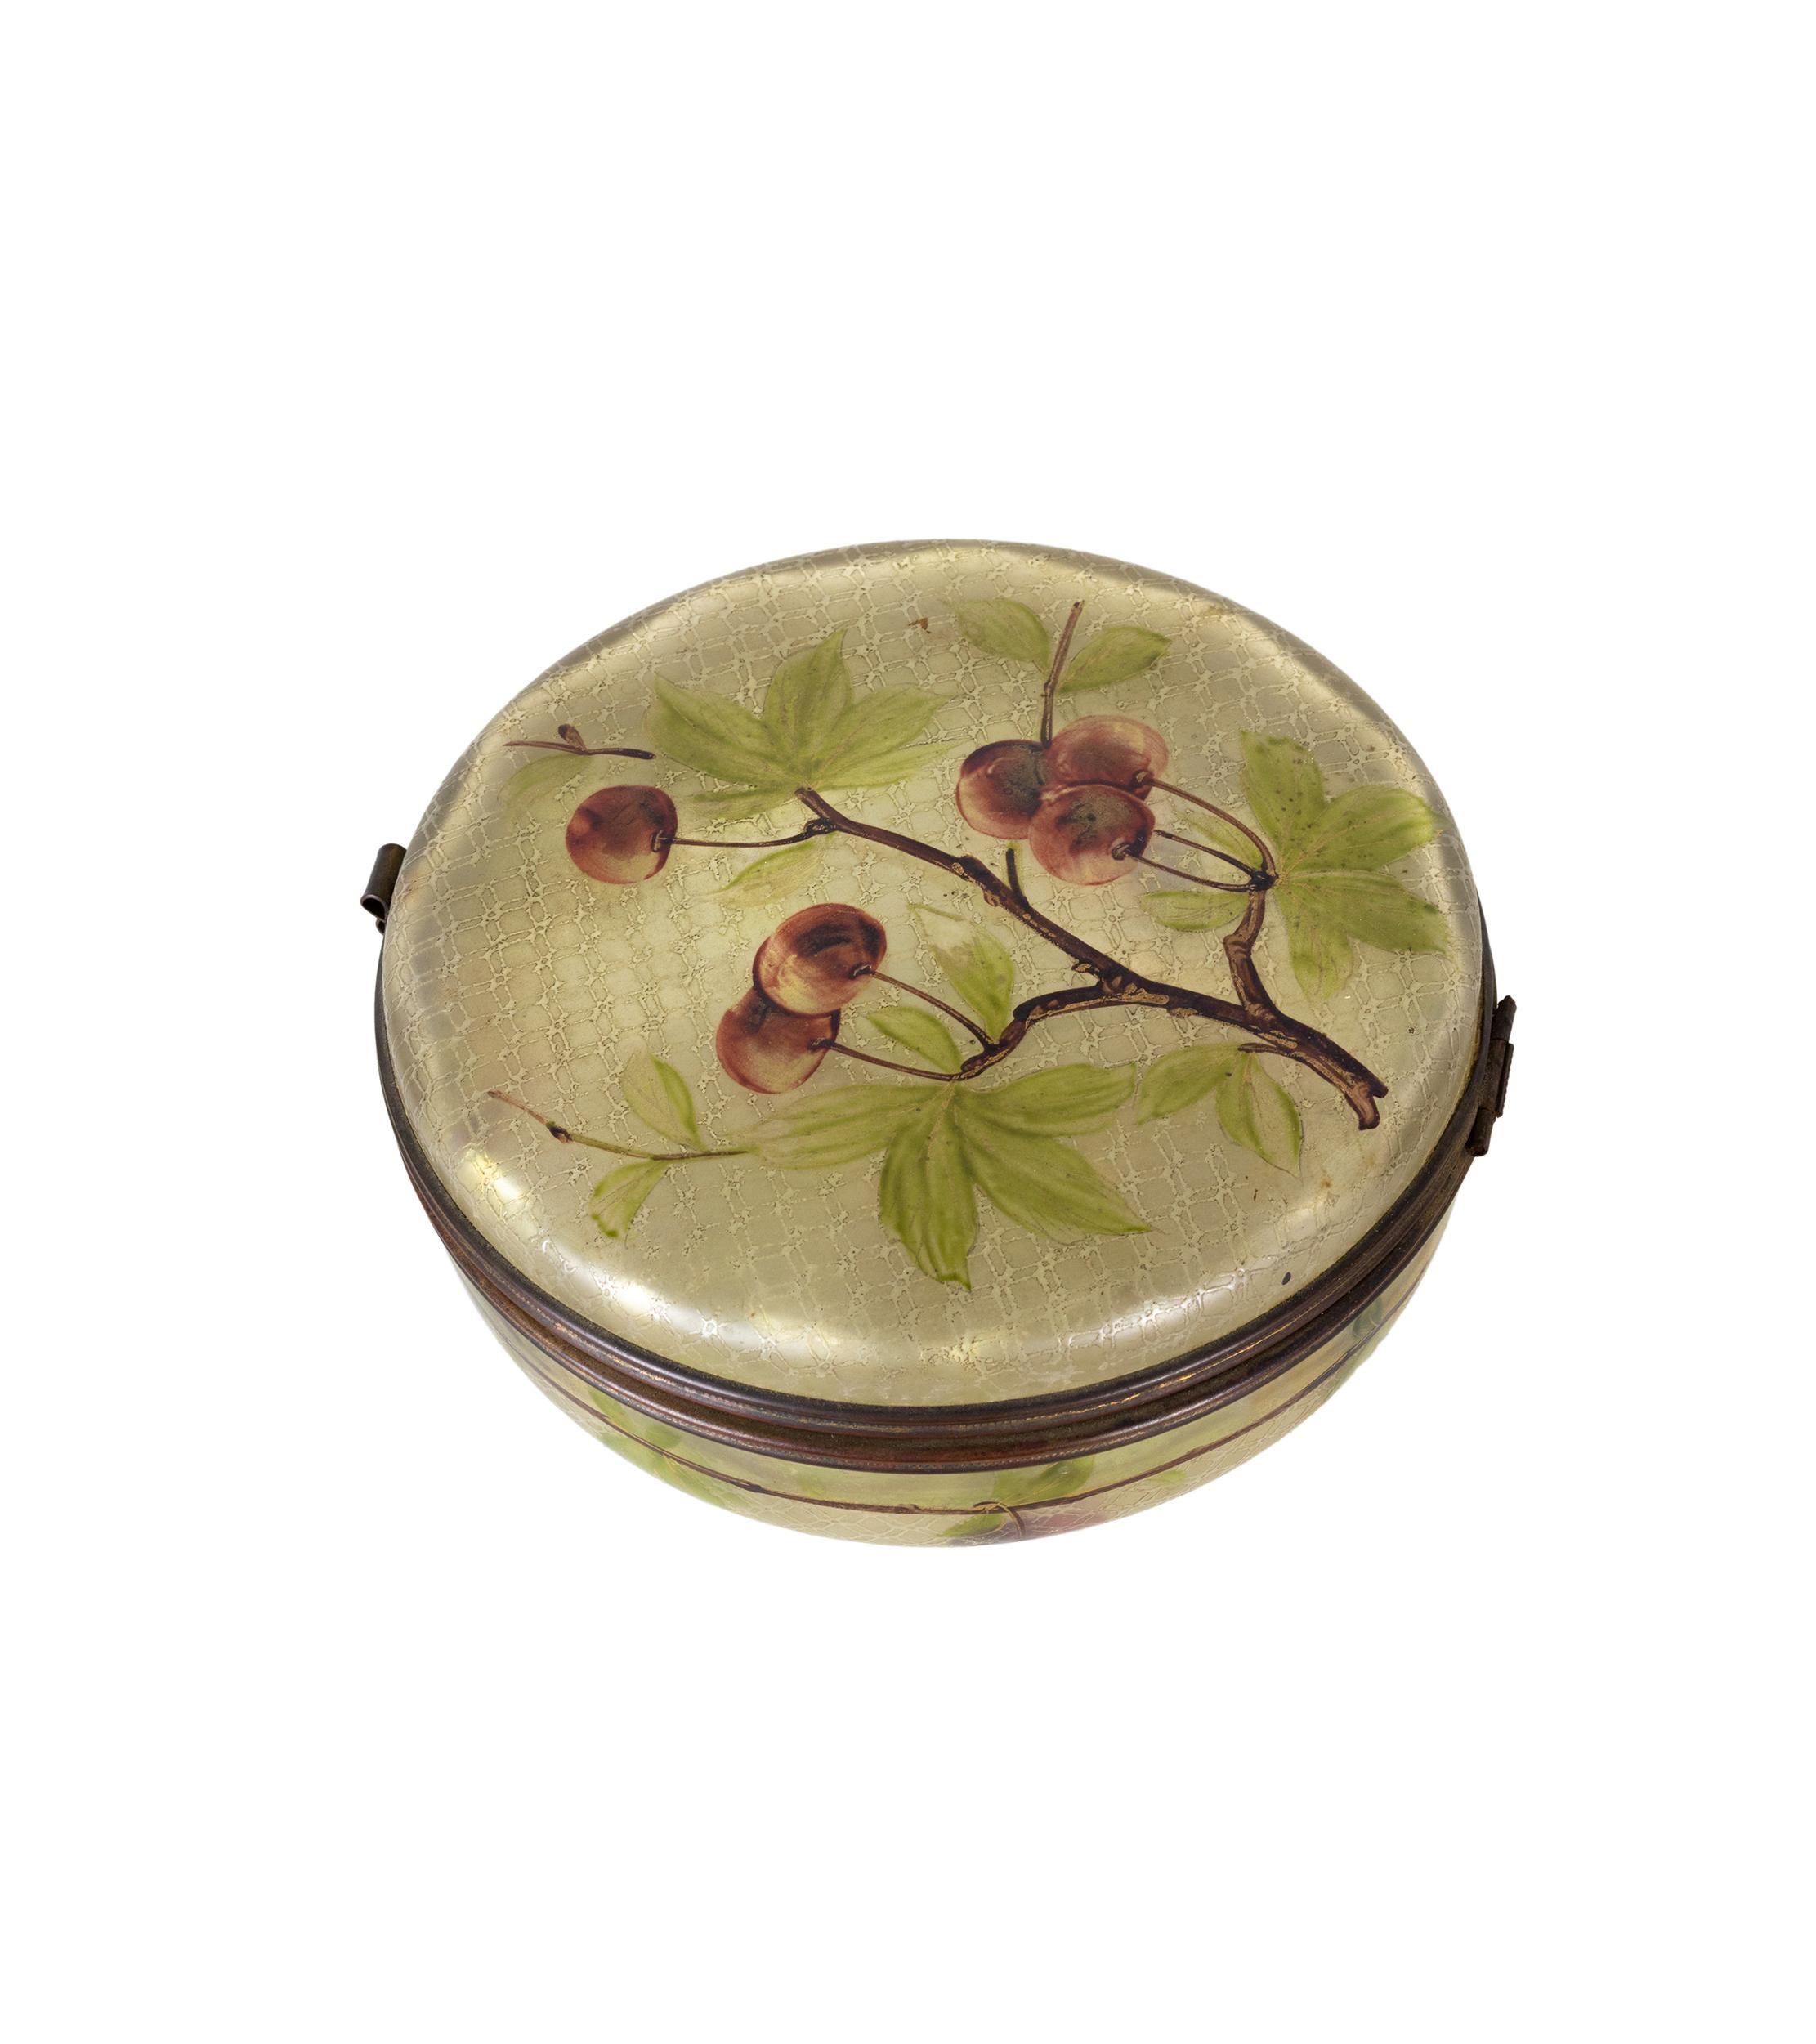 This early 20th-century Art Nouveau enameled glass trinket or jewelry box, adorned with a charming cherry and cherry tree design, showcases exquisite French hand decoration. Its brass hinged lid and intricate details add to its beauty.